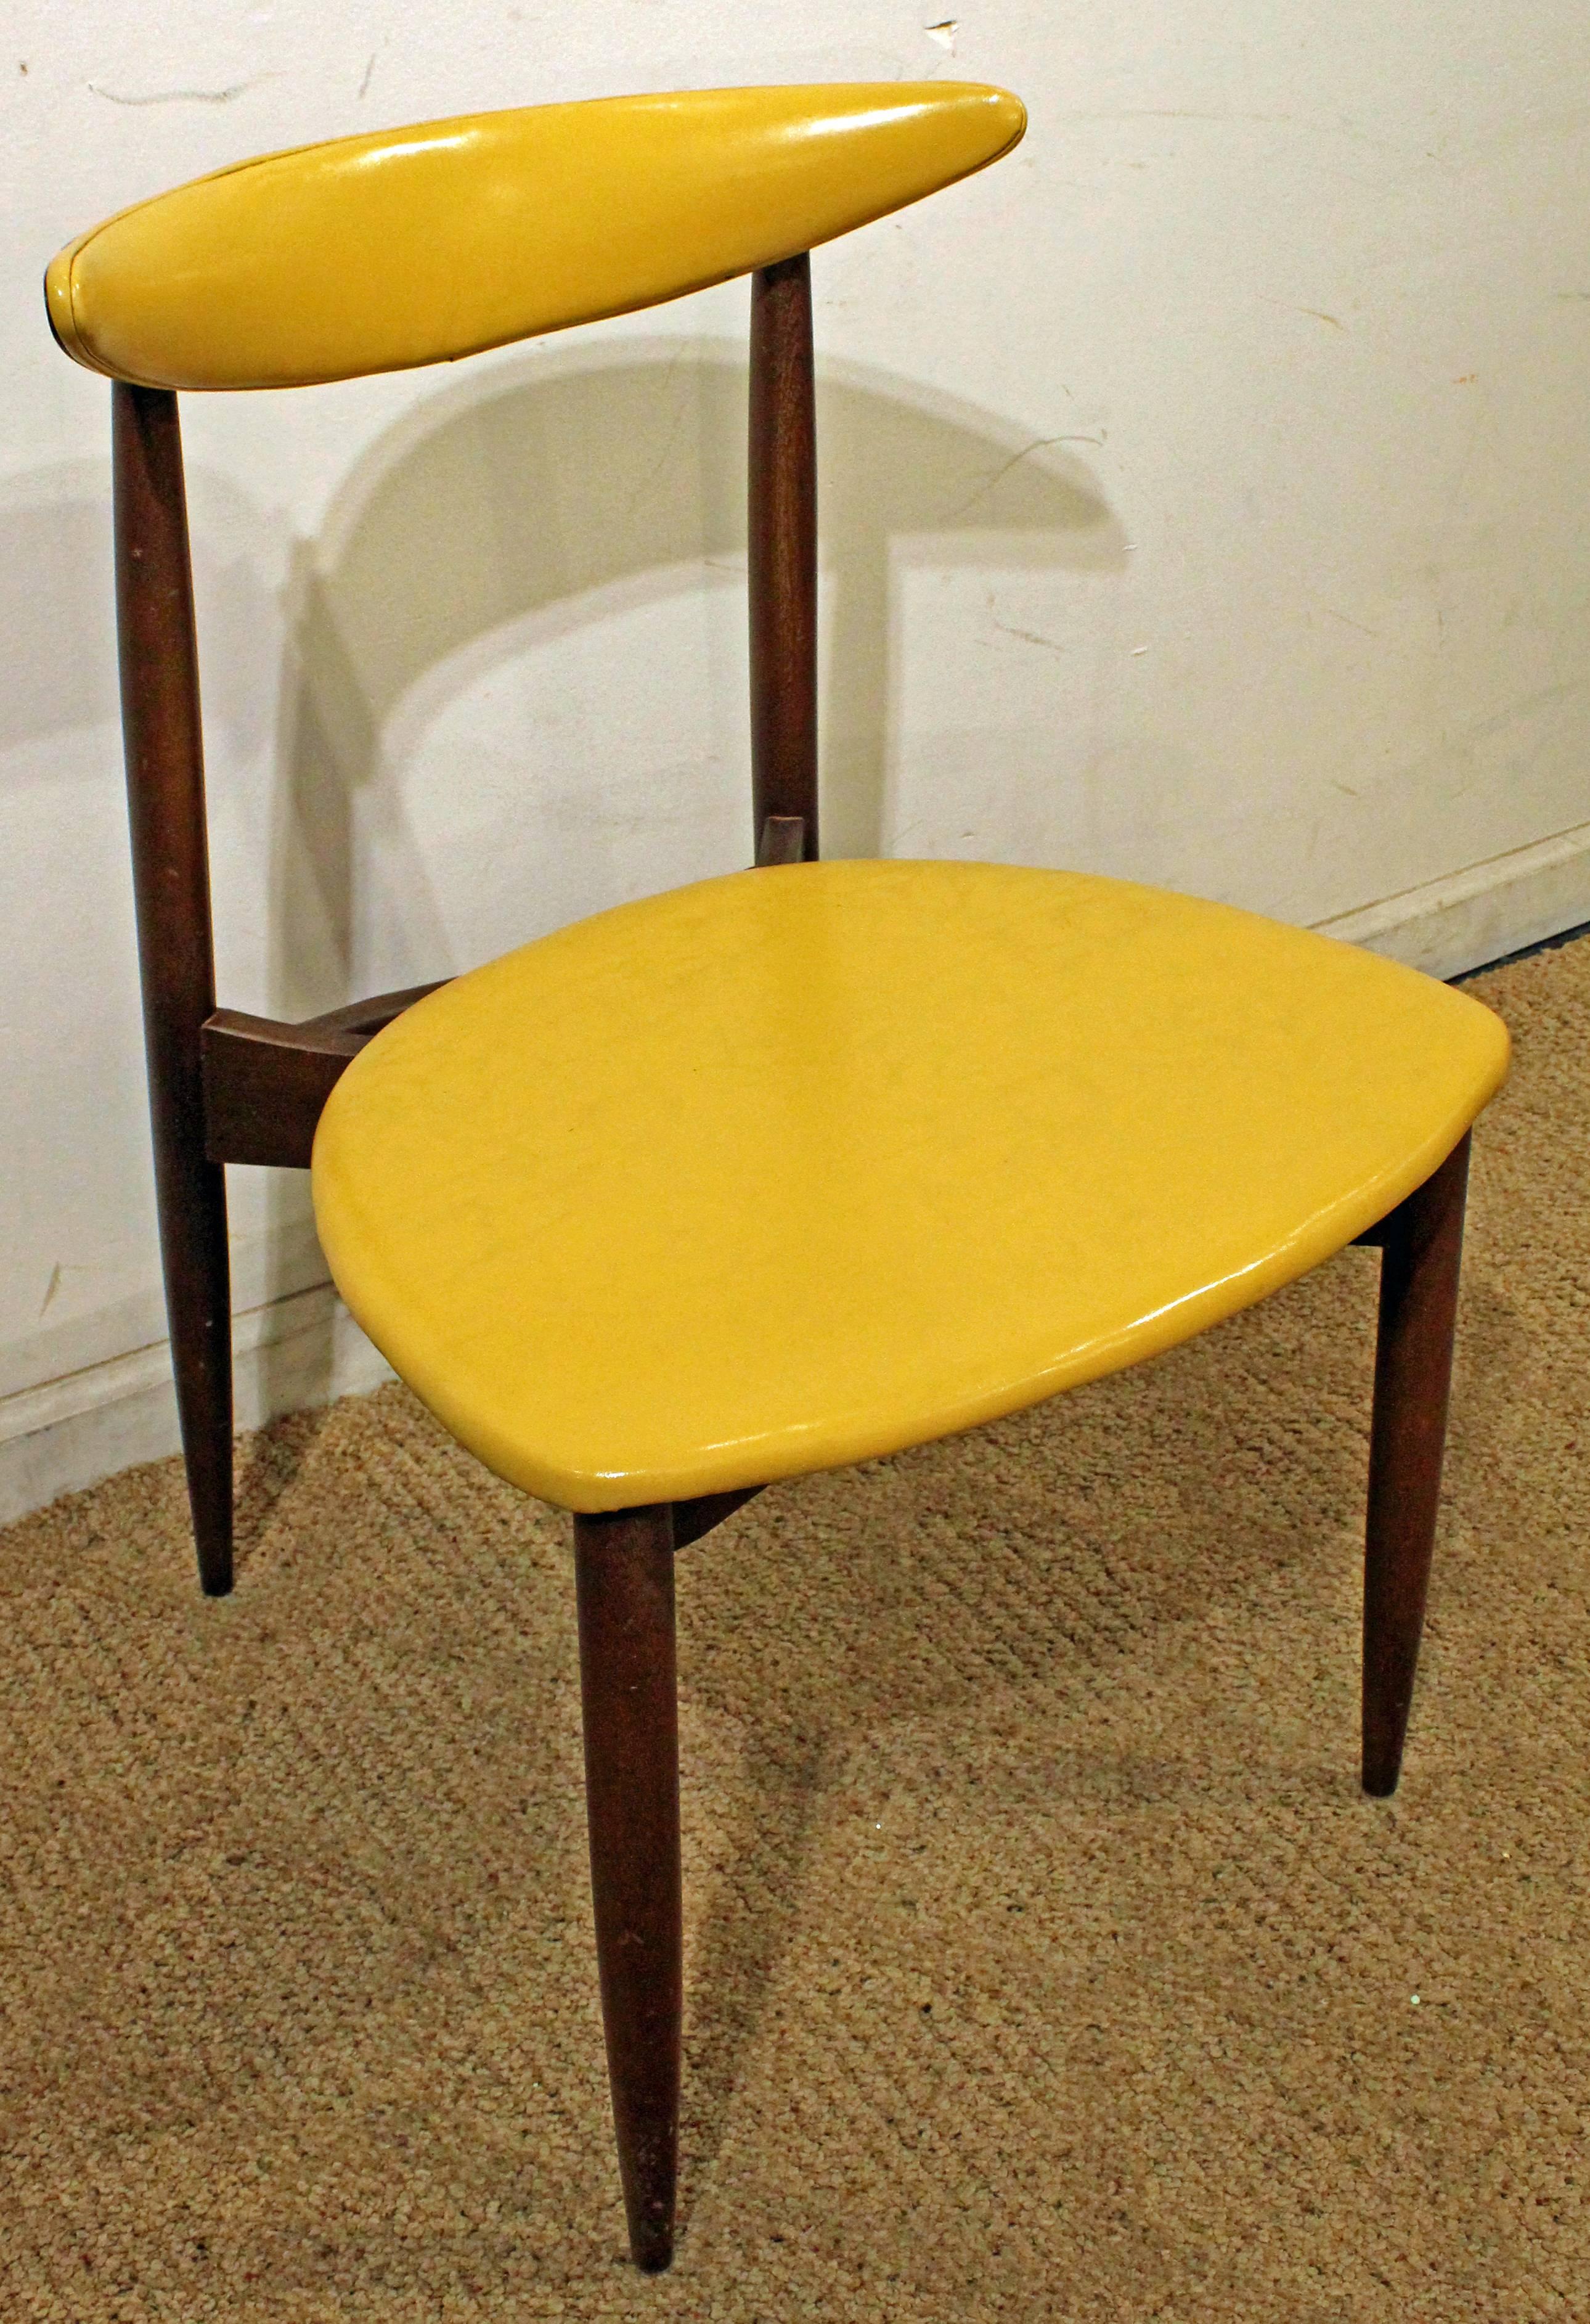 Offered is a walnut side chair designed by Seymour James Wiener for Kodawood. It is signed by Kodawood.